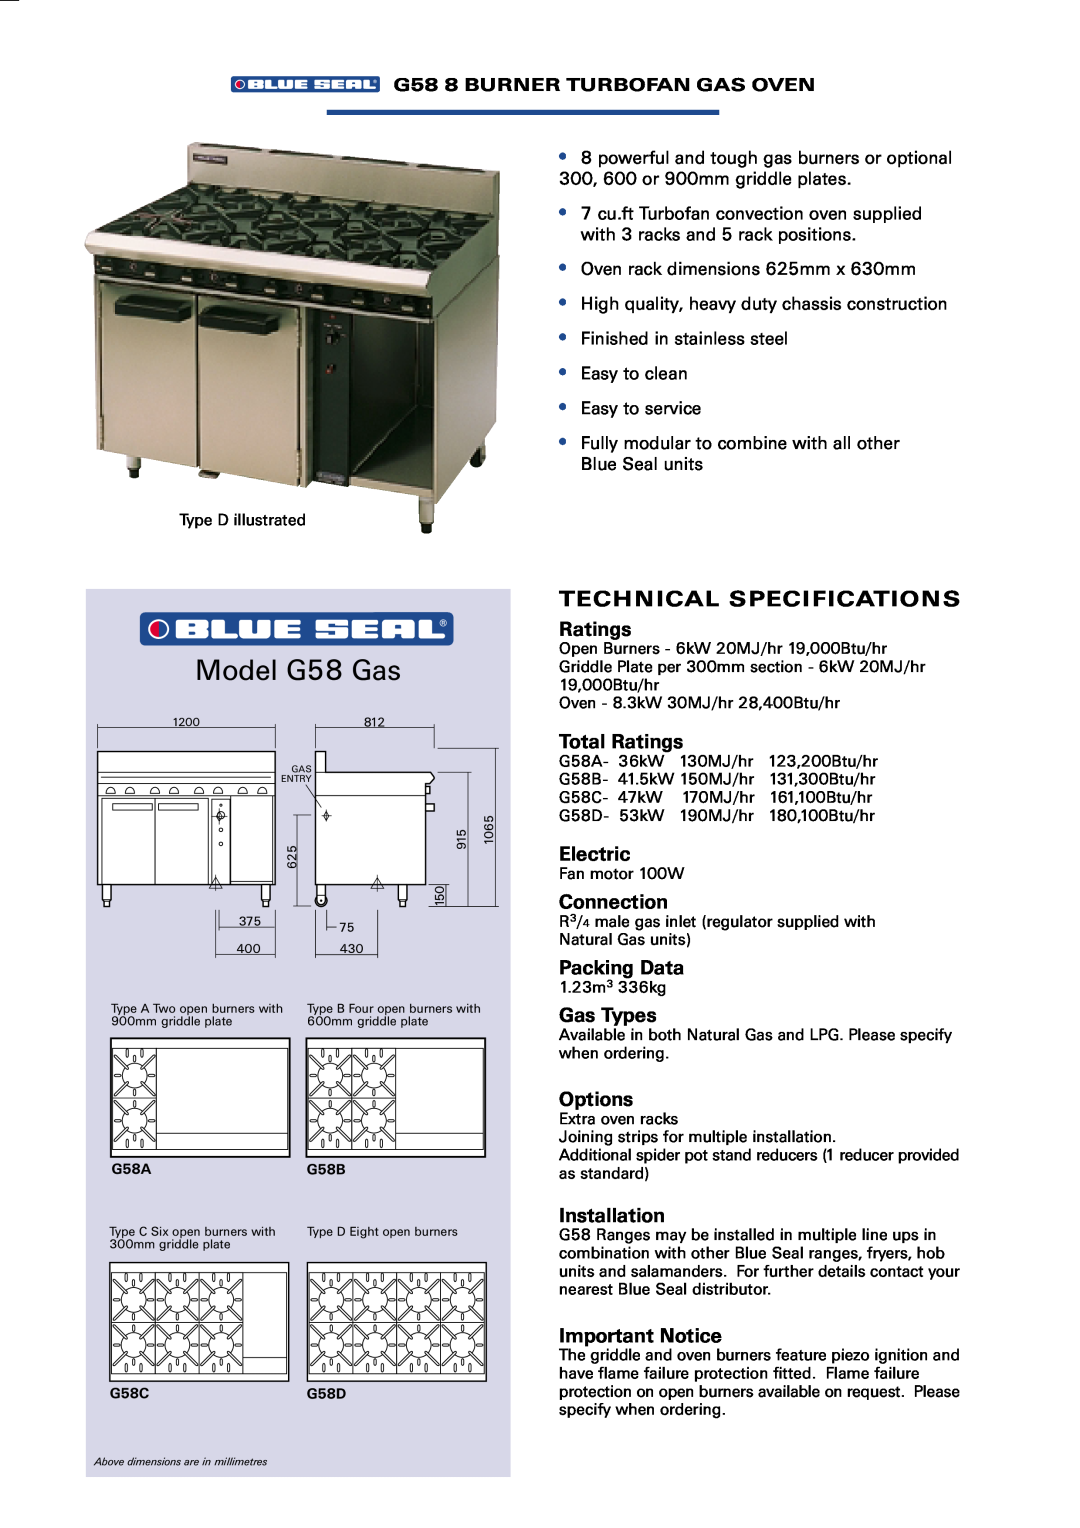 Moffat G56 Model G58 Gas, G58 8 BURNER TURBOFAN GAS OVEN, Technical Specifications, Total Ratings, Electric, Gas Types 